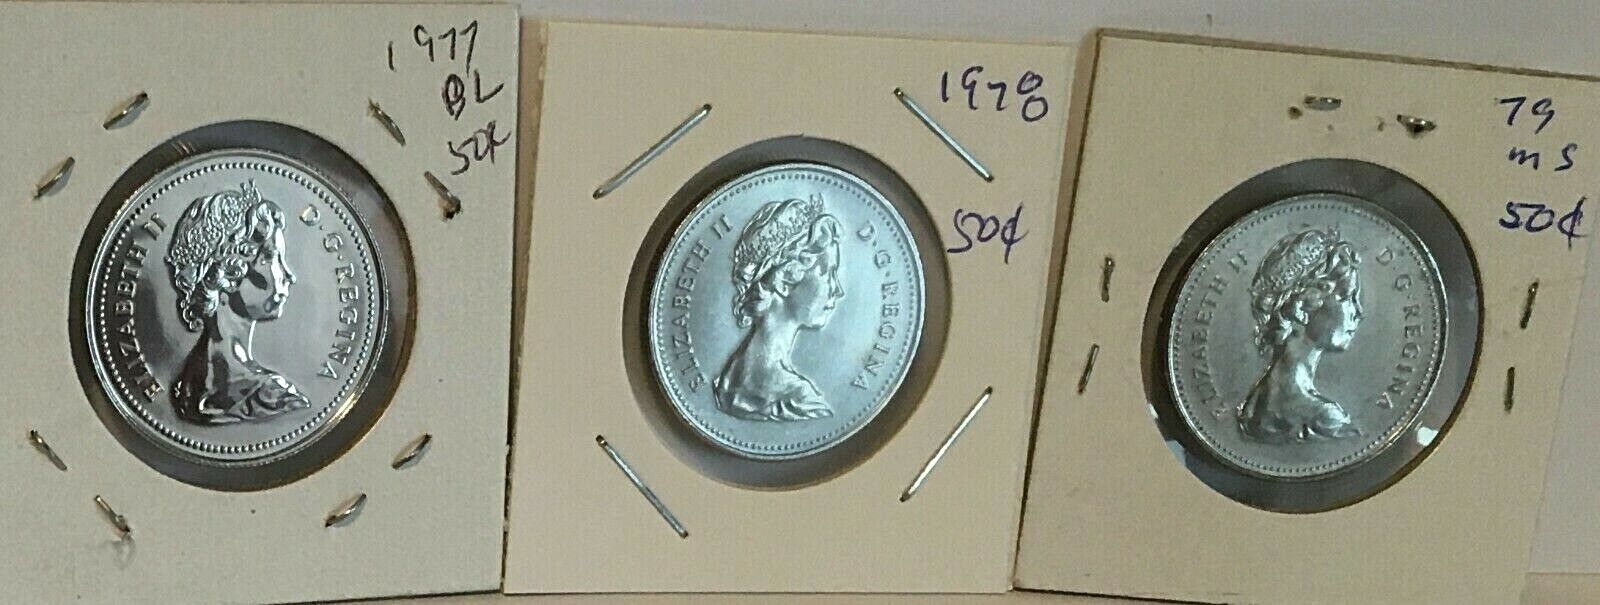 CANADA 1977 78 79  50 CENT NICKEL COIN FROM A HUGE COLLECTION 'KEEP FOLLOWING US Без бренда - фотография #2